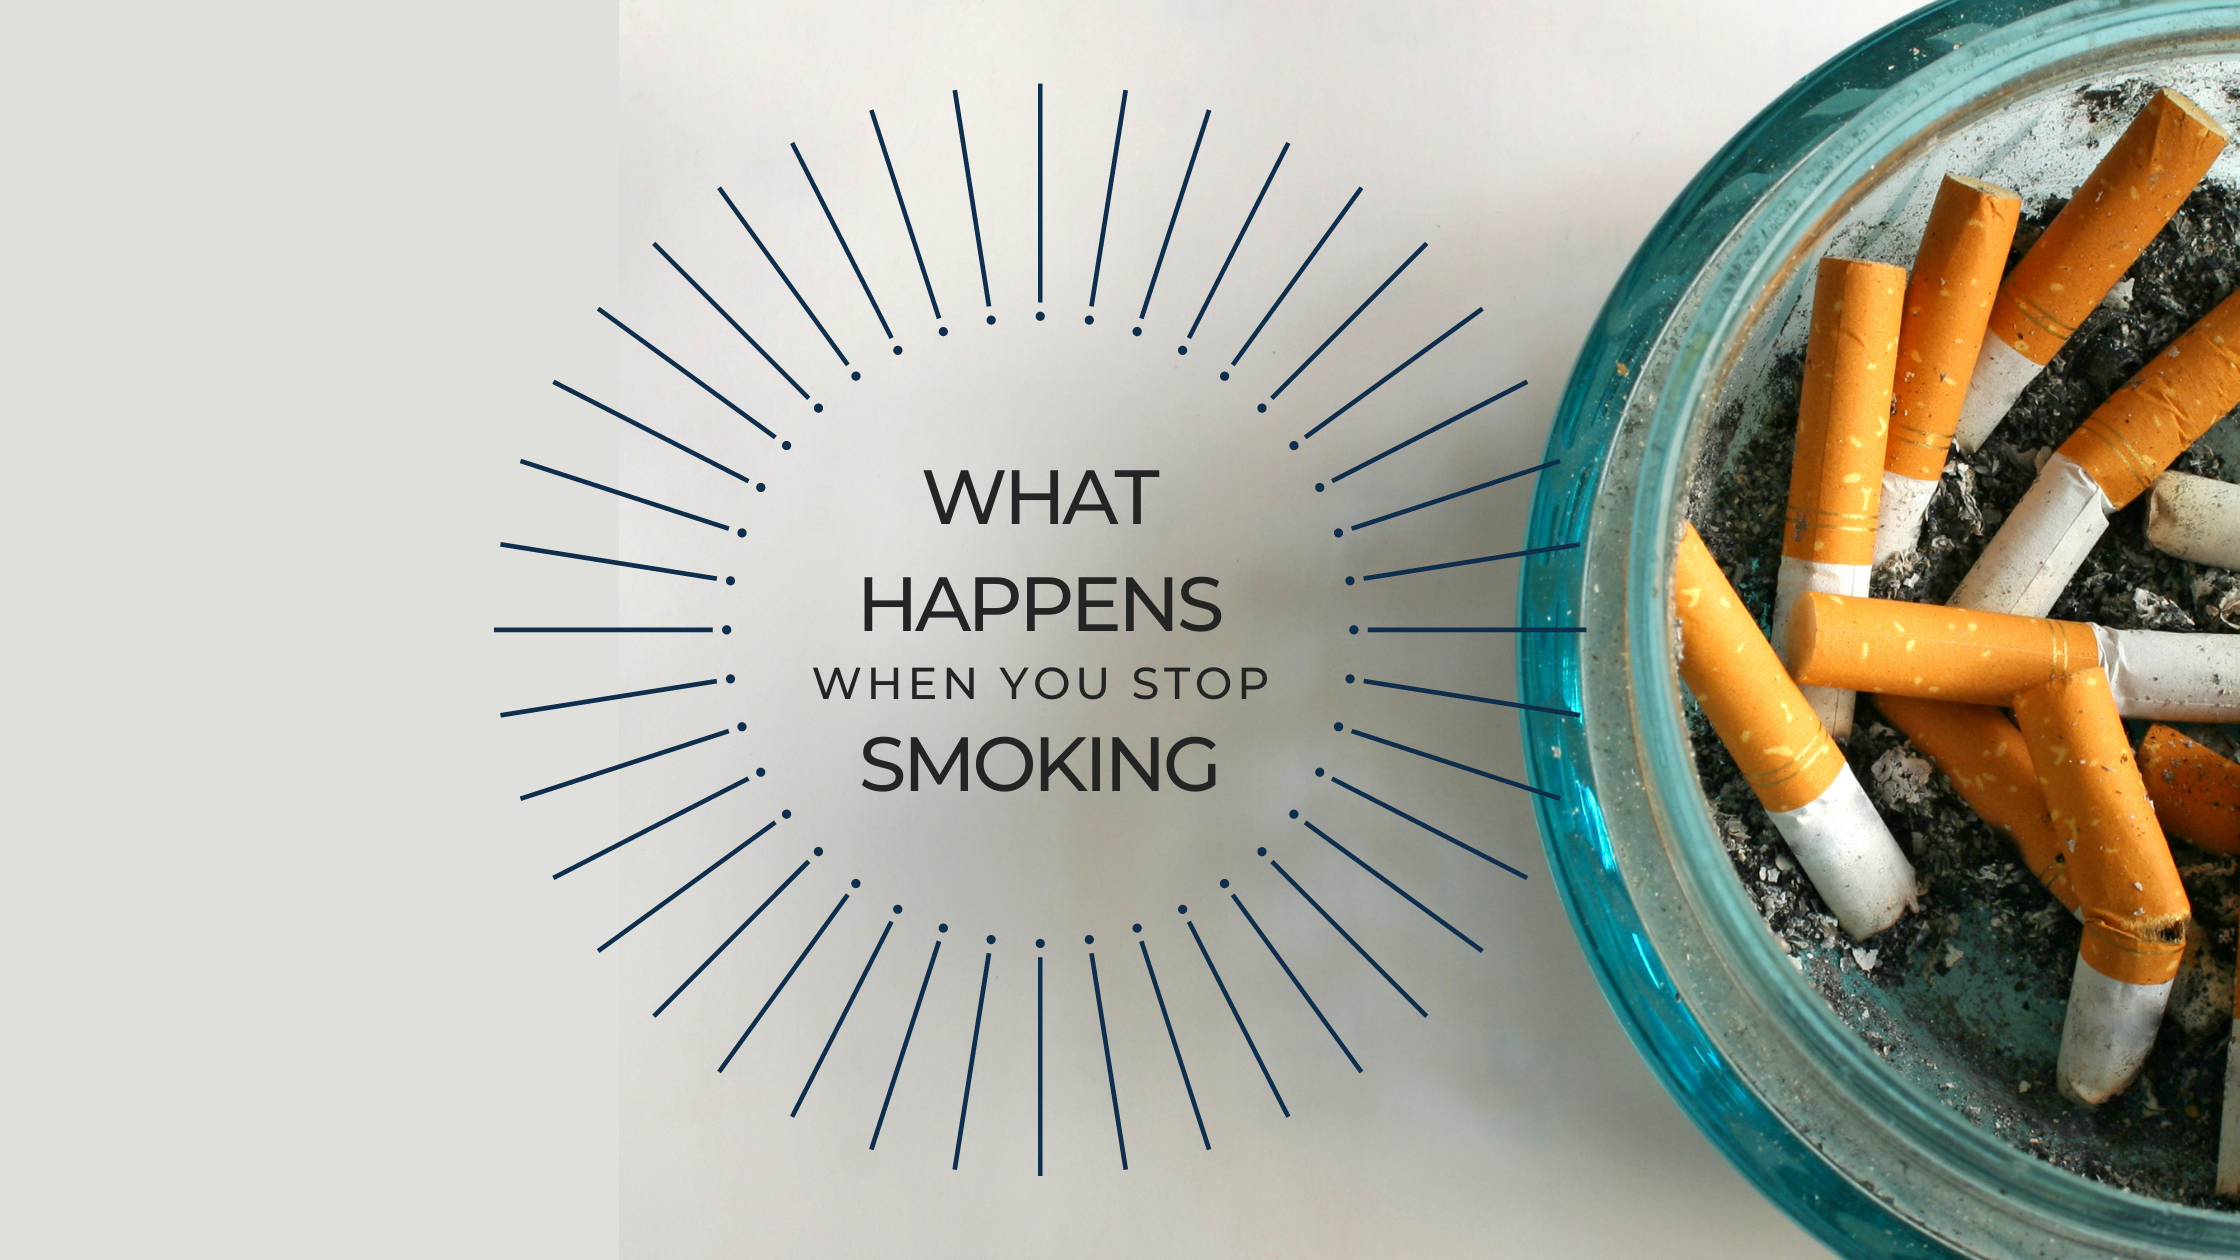 What's the best way to quit smoking? - Harvard Health